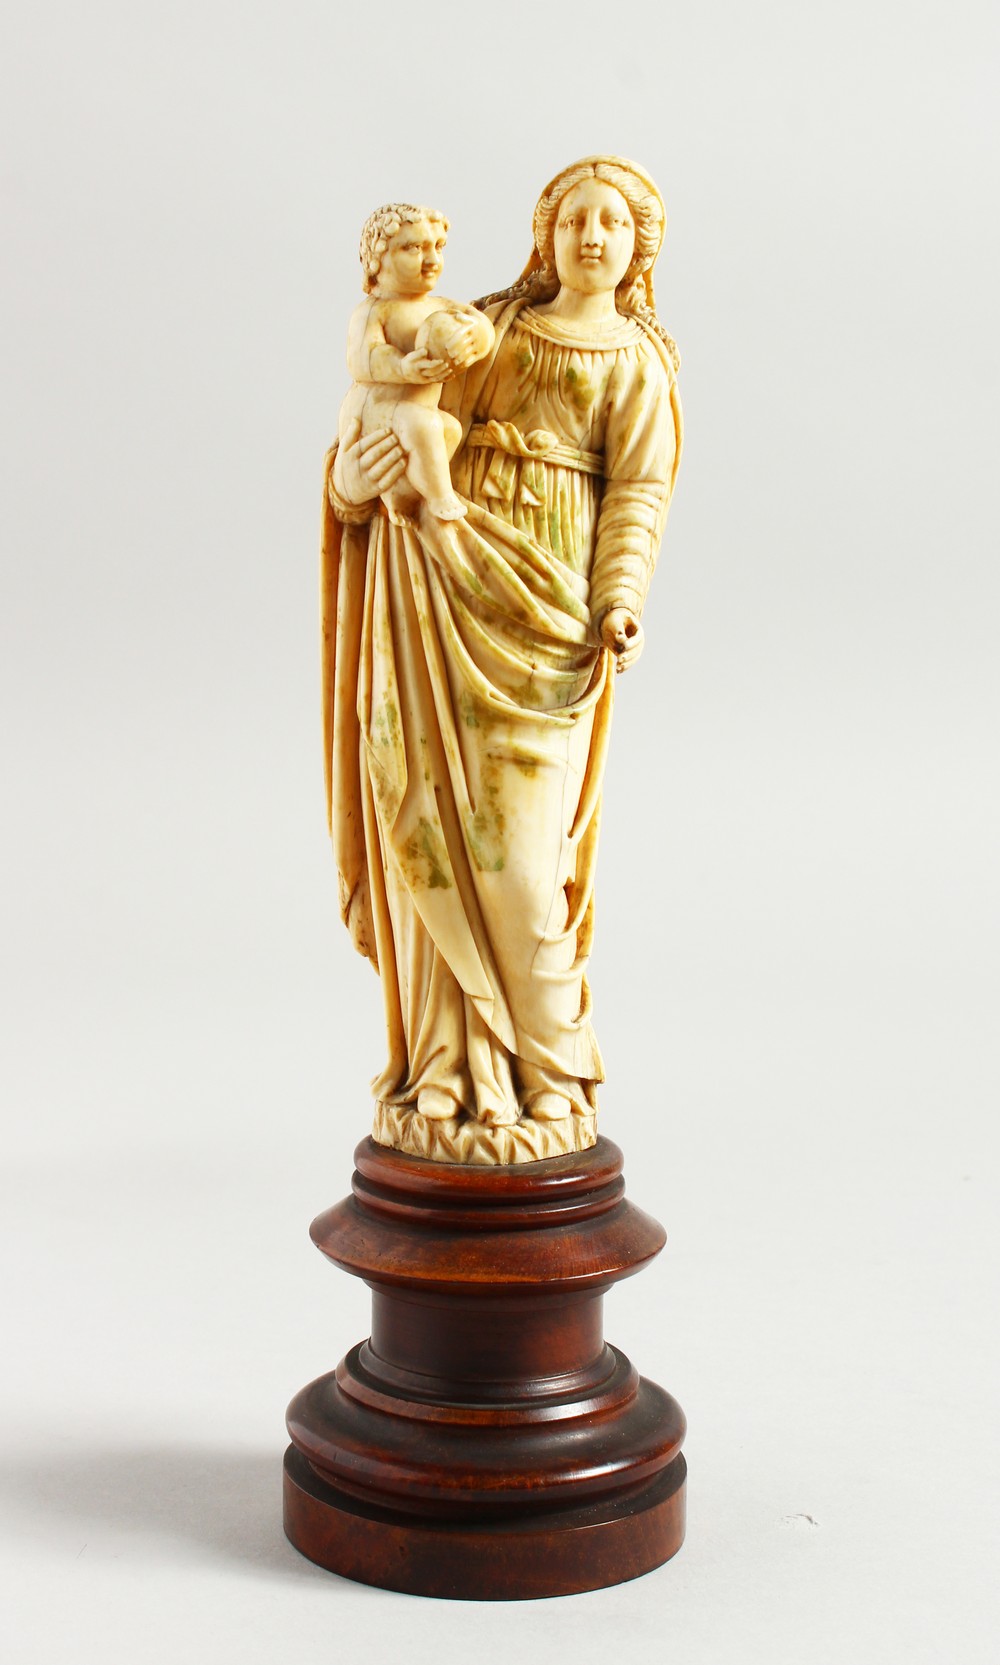 A GOOD 17TH-18TH CENTURY GOAN CARVED IVORY MADONNA AND CHILD on a circular wooden base. 6.25ins